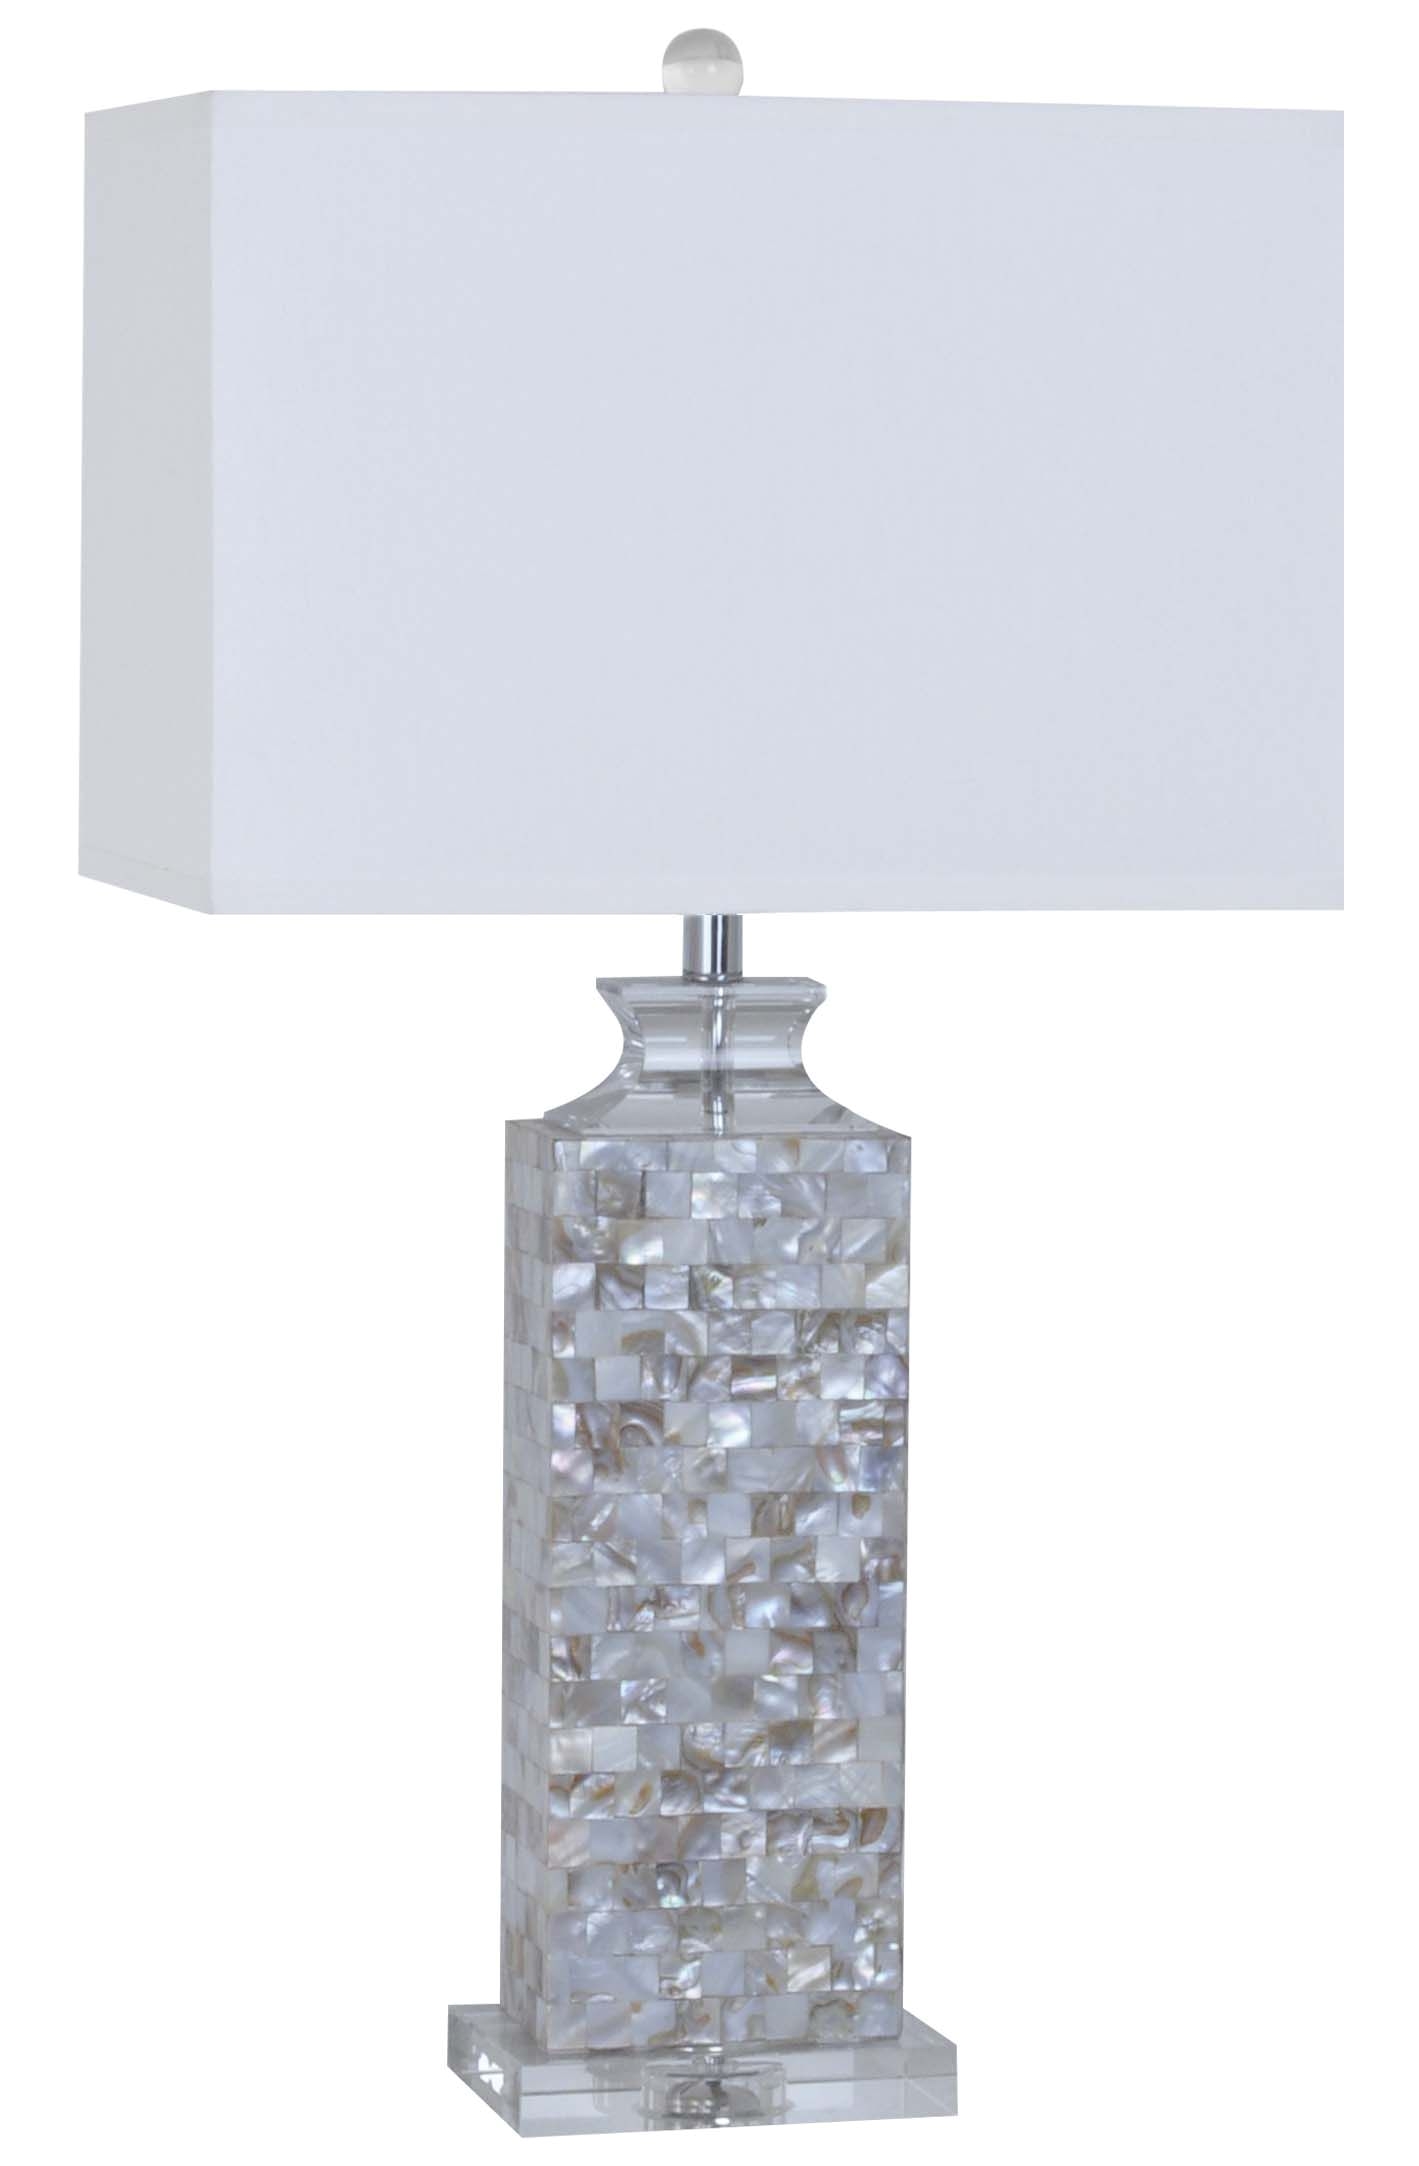 Crystal Table Lamps for Living Room A Pattern Of Pretty Mosiac Tiles Graces the Base Of This Lamp